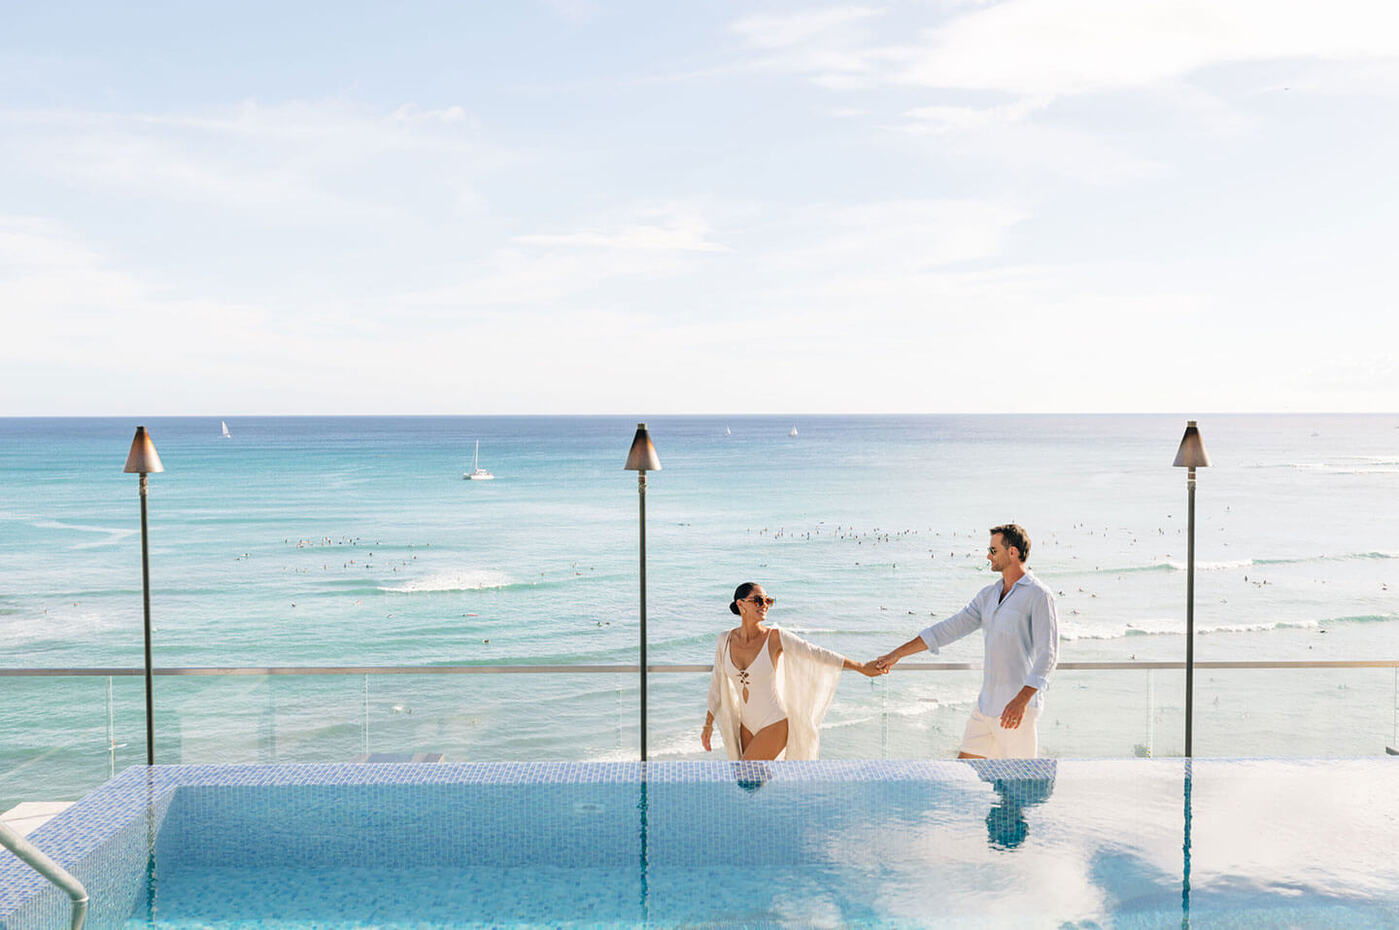 Couple walking along pool side with oceanfront views